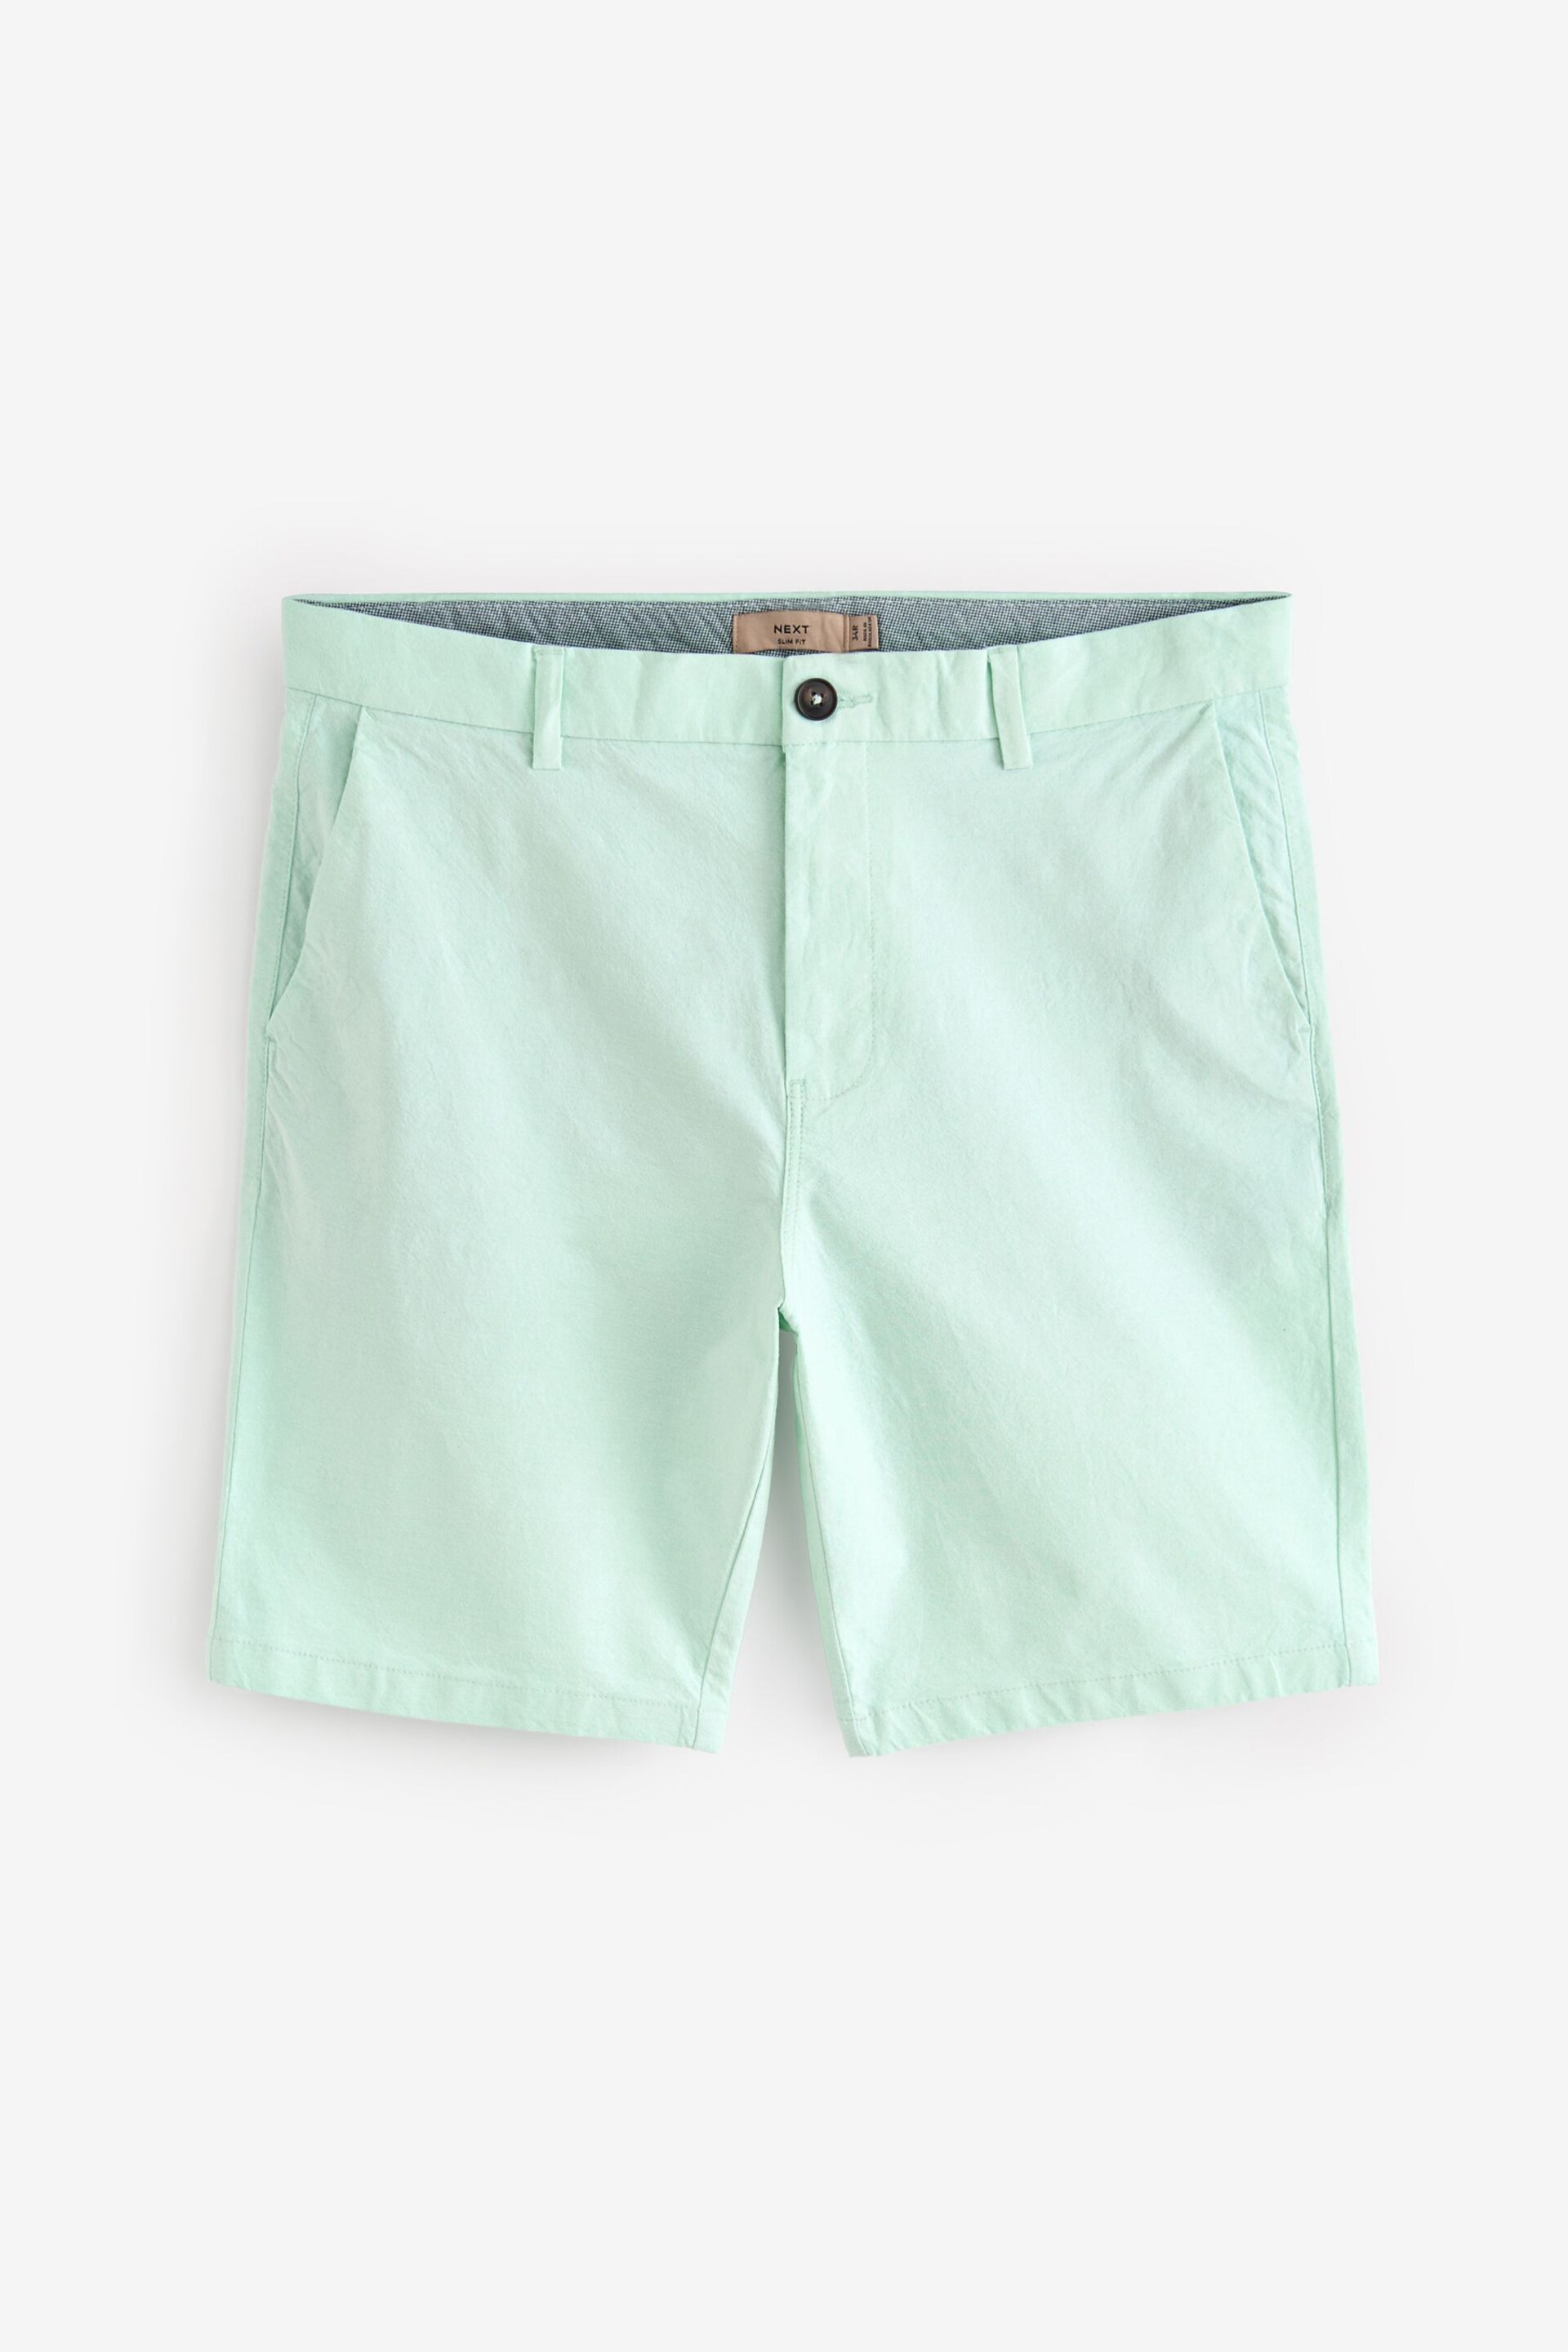 Mint Green Slim Fit Stretch Chinos Shorts - Image 5 of 8